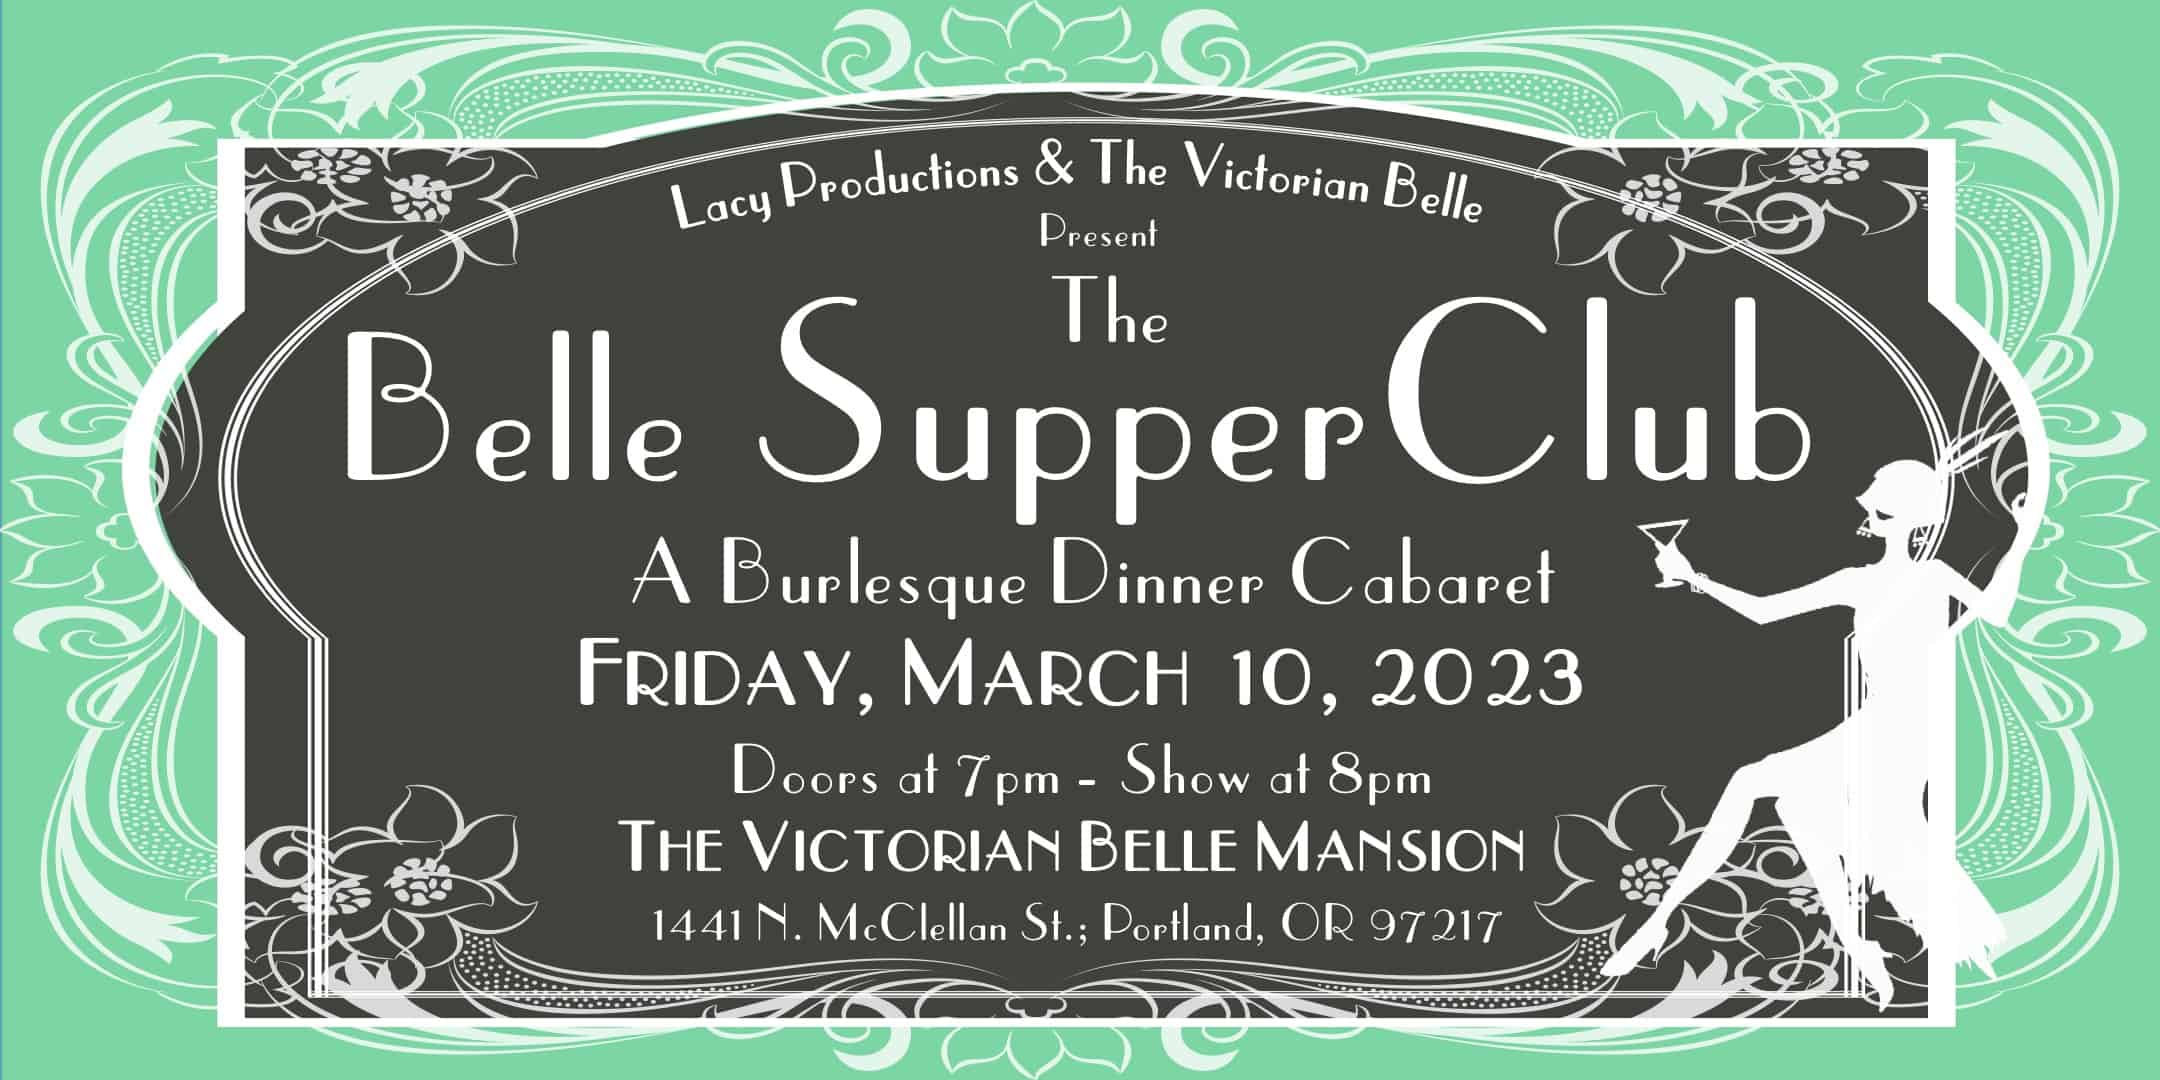 The Belle Supper Club: A Burlesque Dinner Cabaret. Friday, March 10th, 2023. Doors at 7pm, show at 8pm